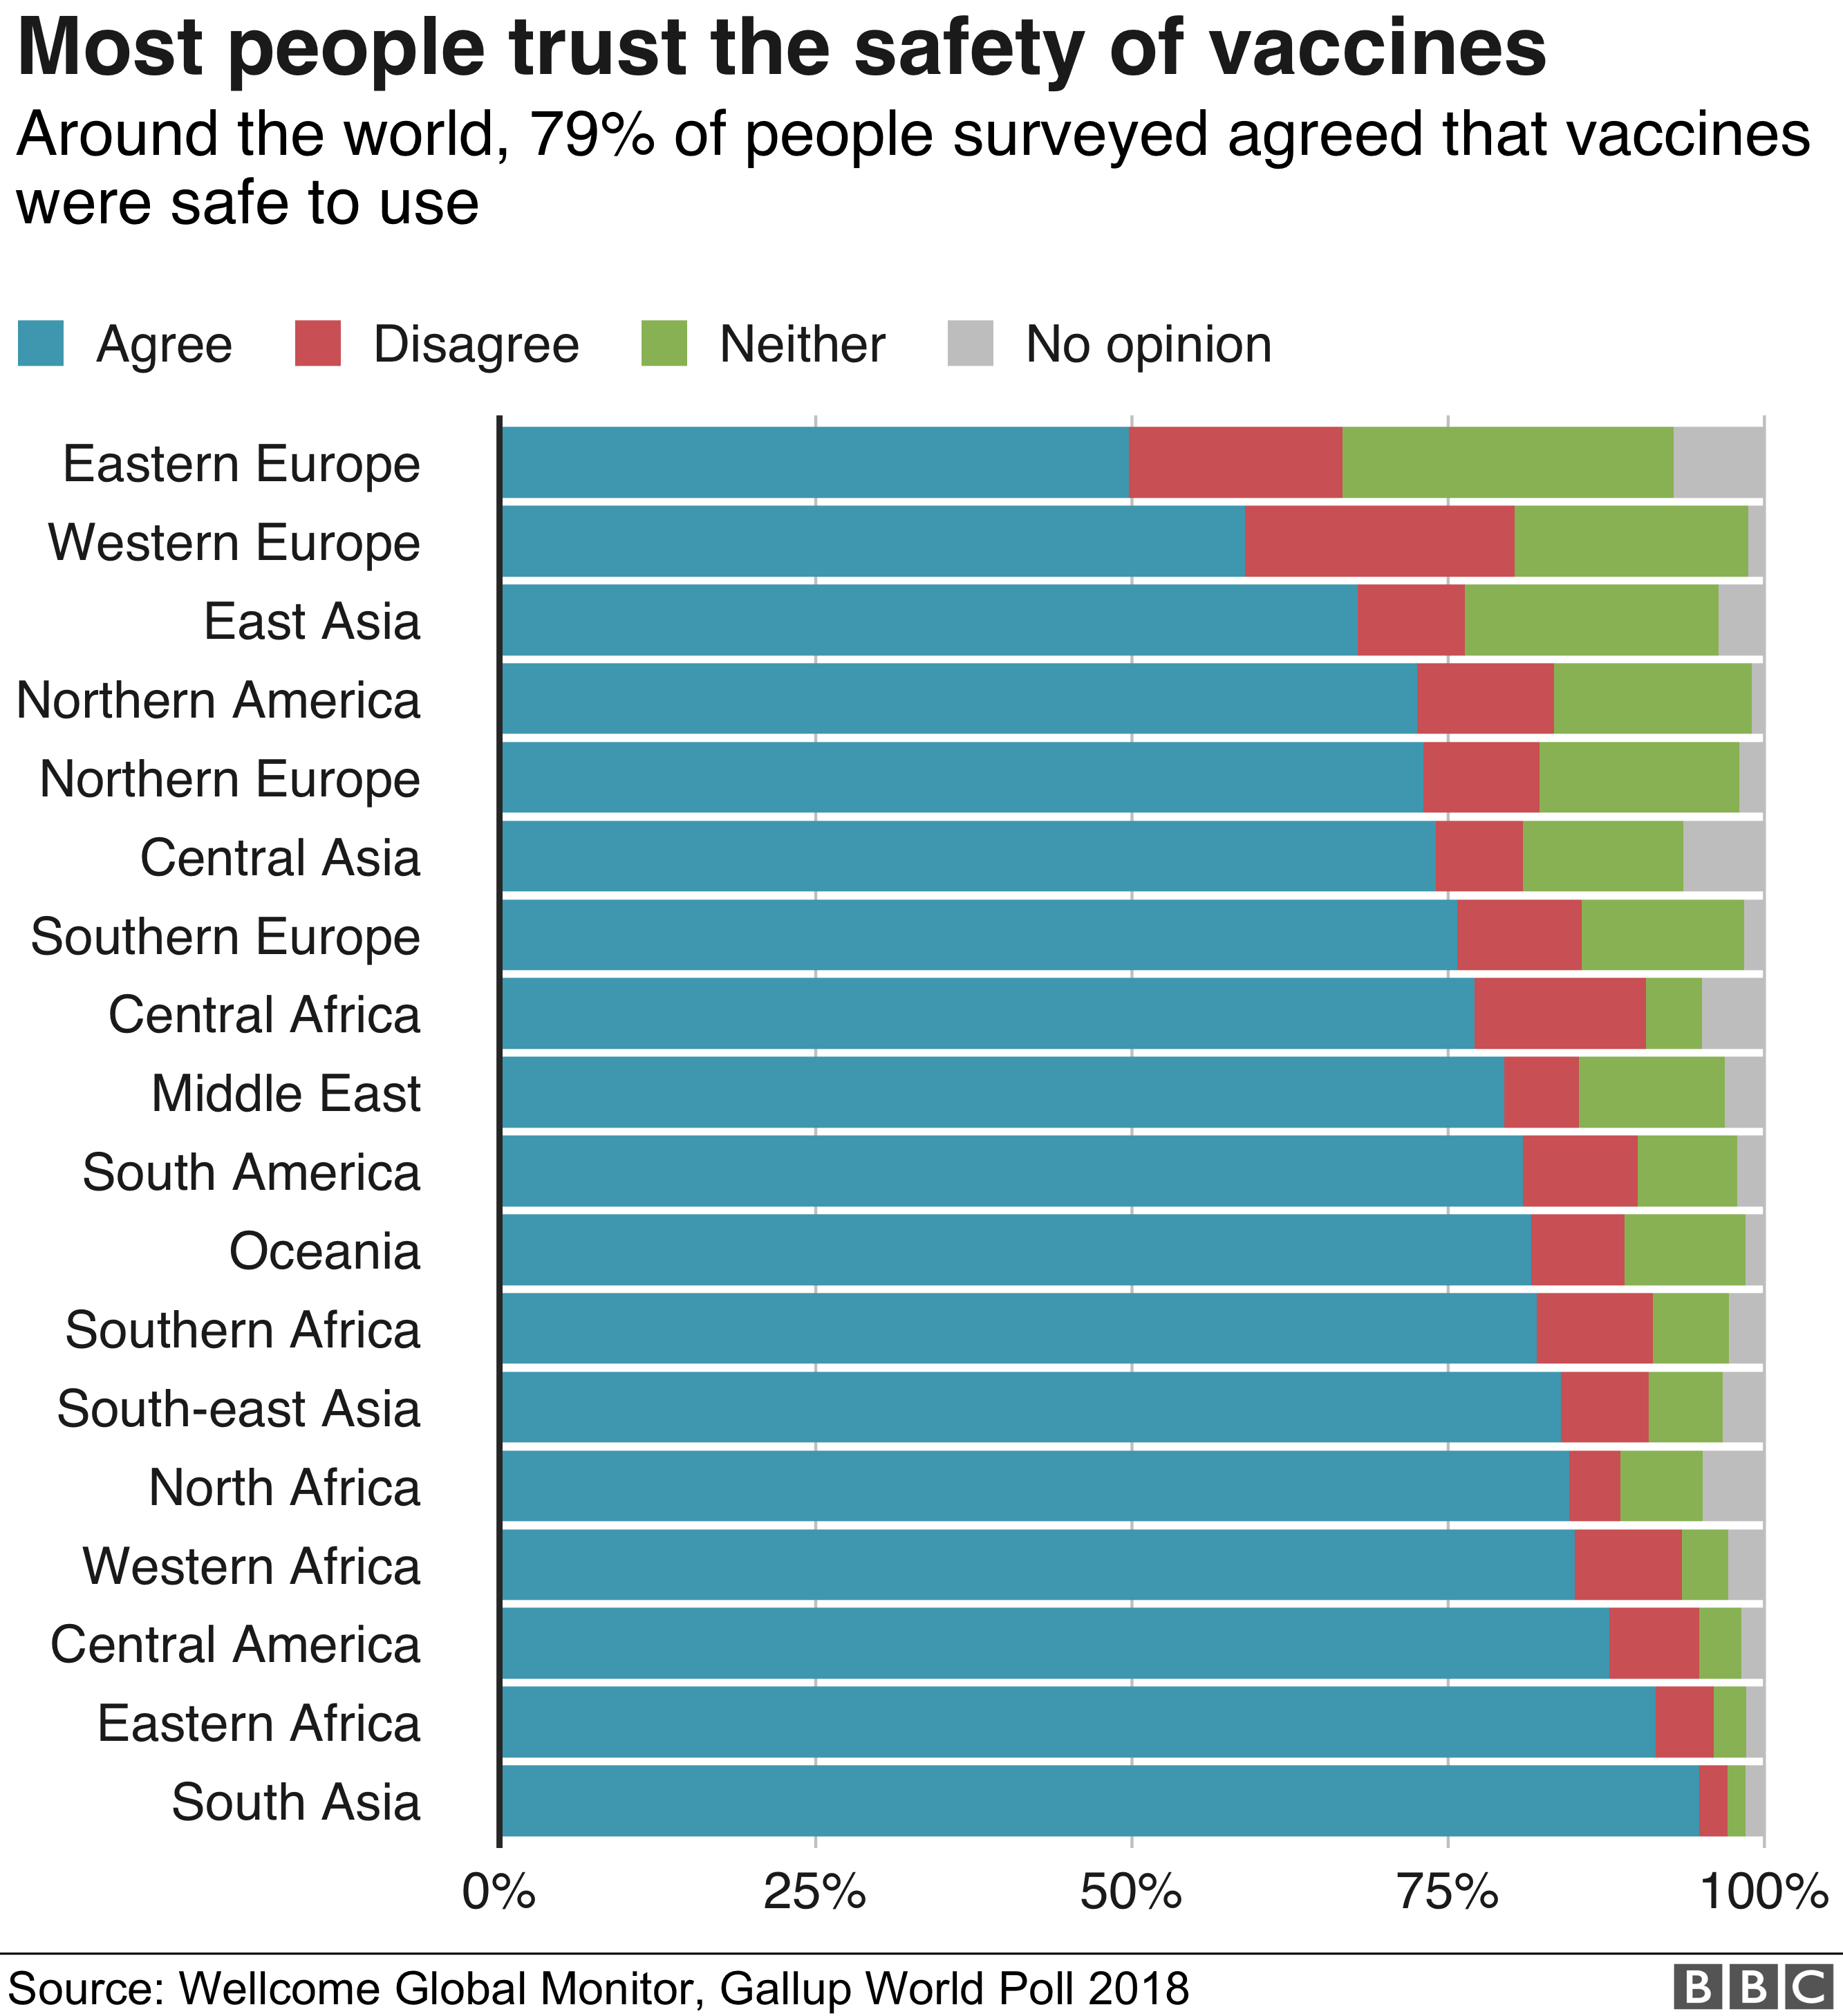 Regional chart of attitudes to vaccine safety